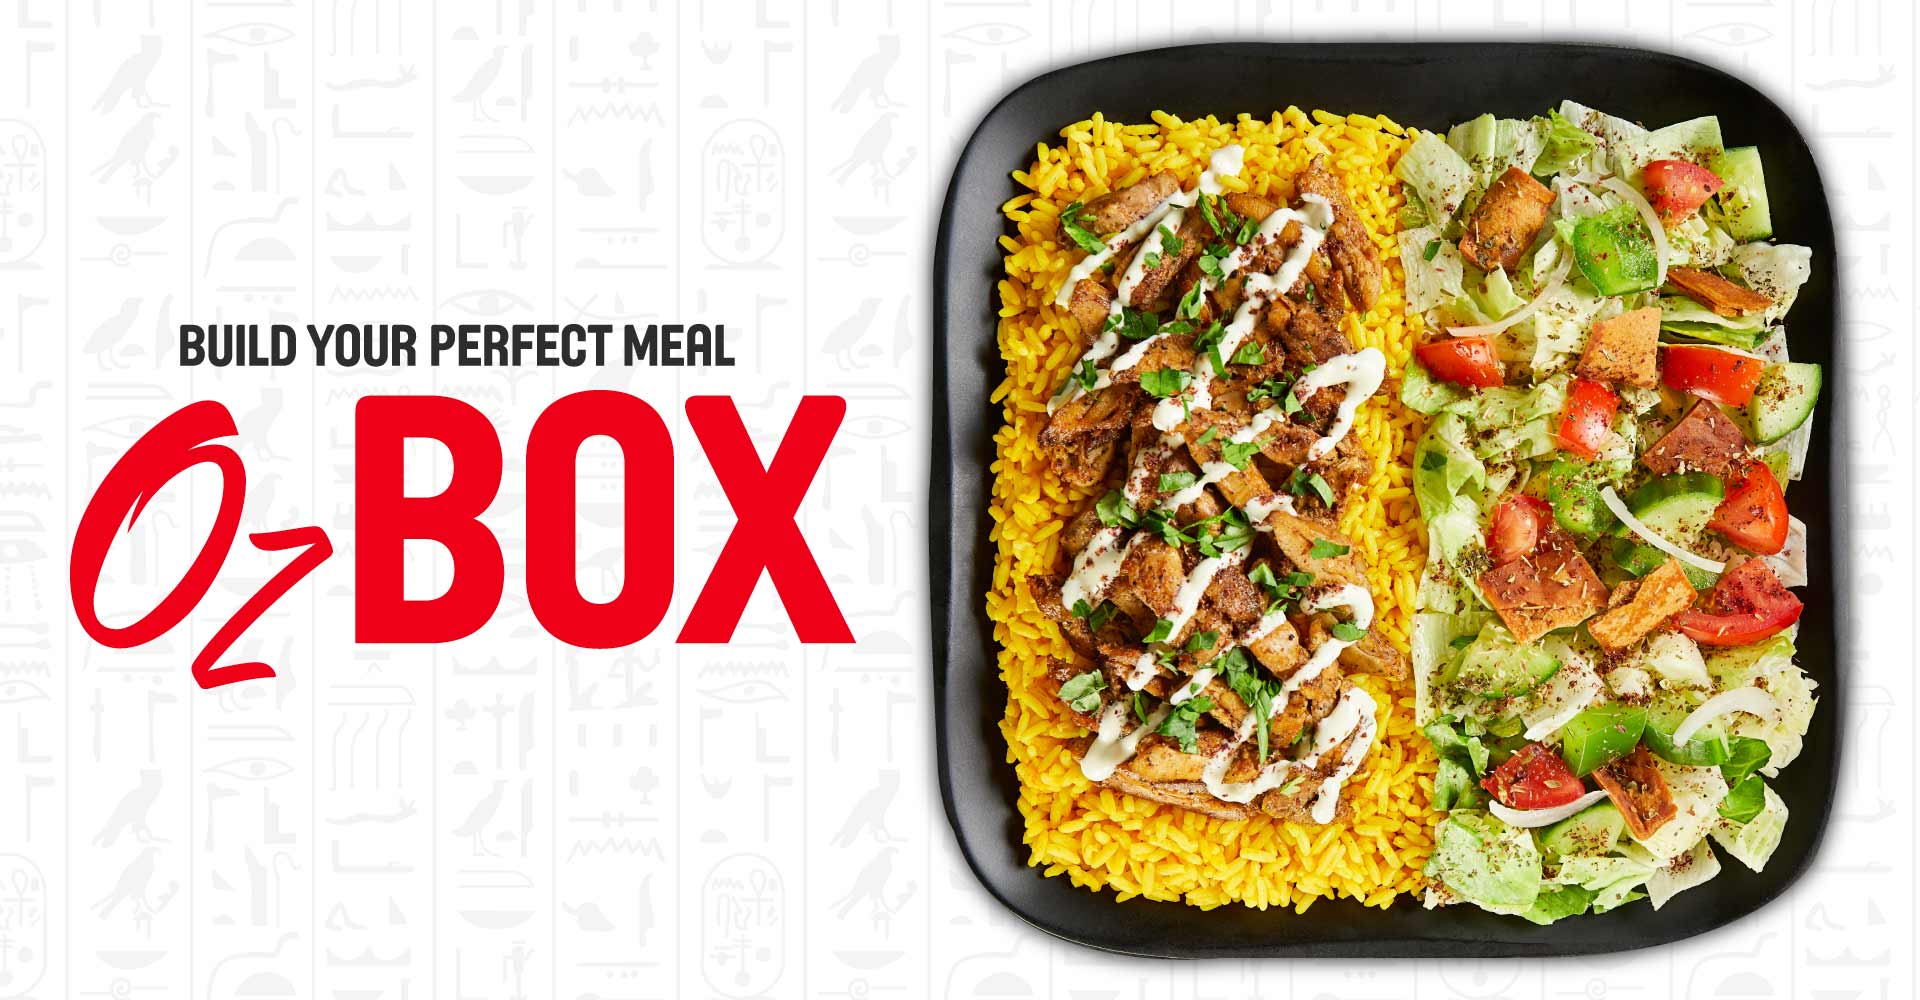 build your perfect meal - Oz Box